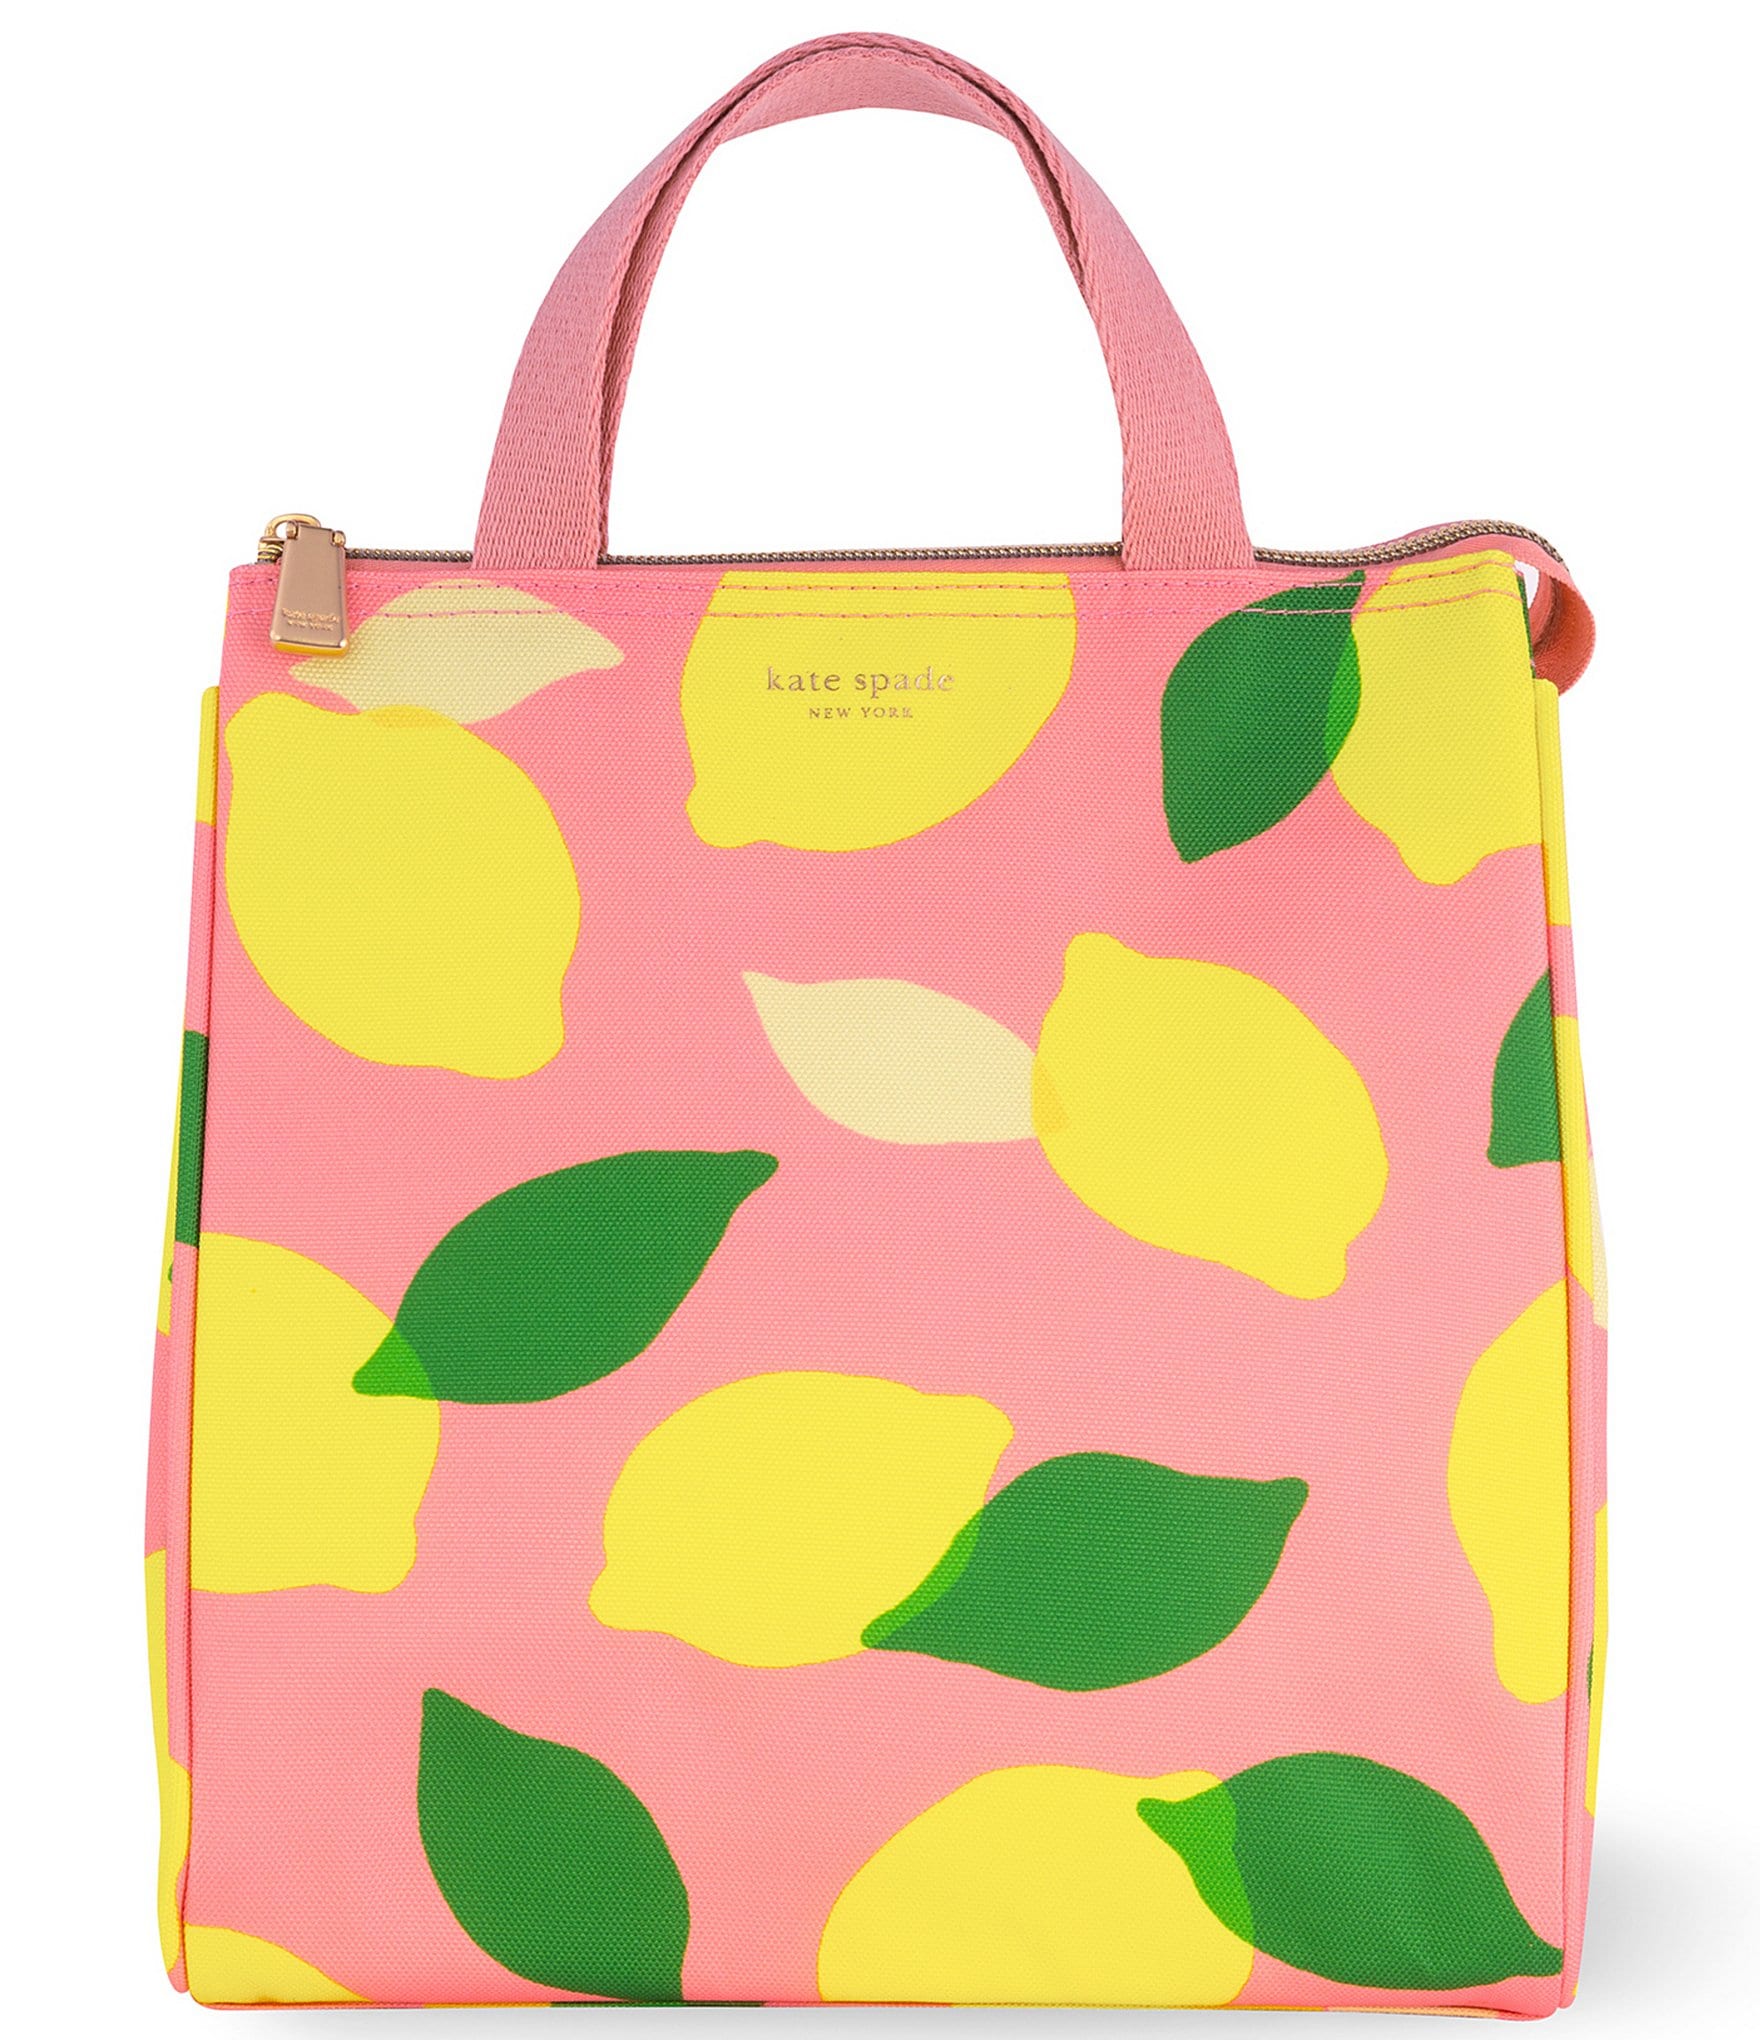 Discover 70+ kate spade tote bags sale super hot - in.cdgdbentre